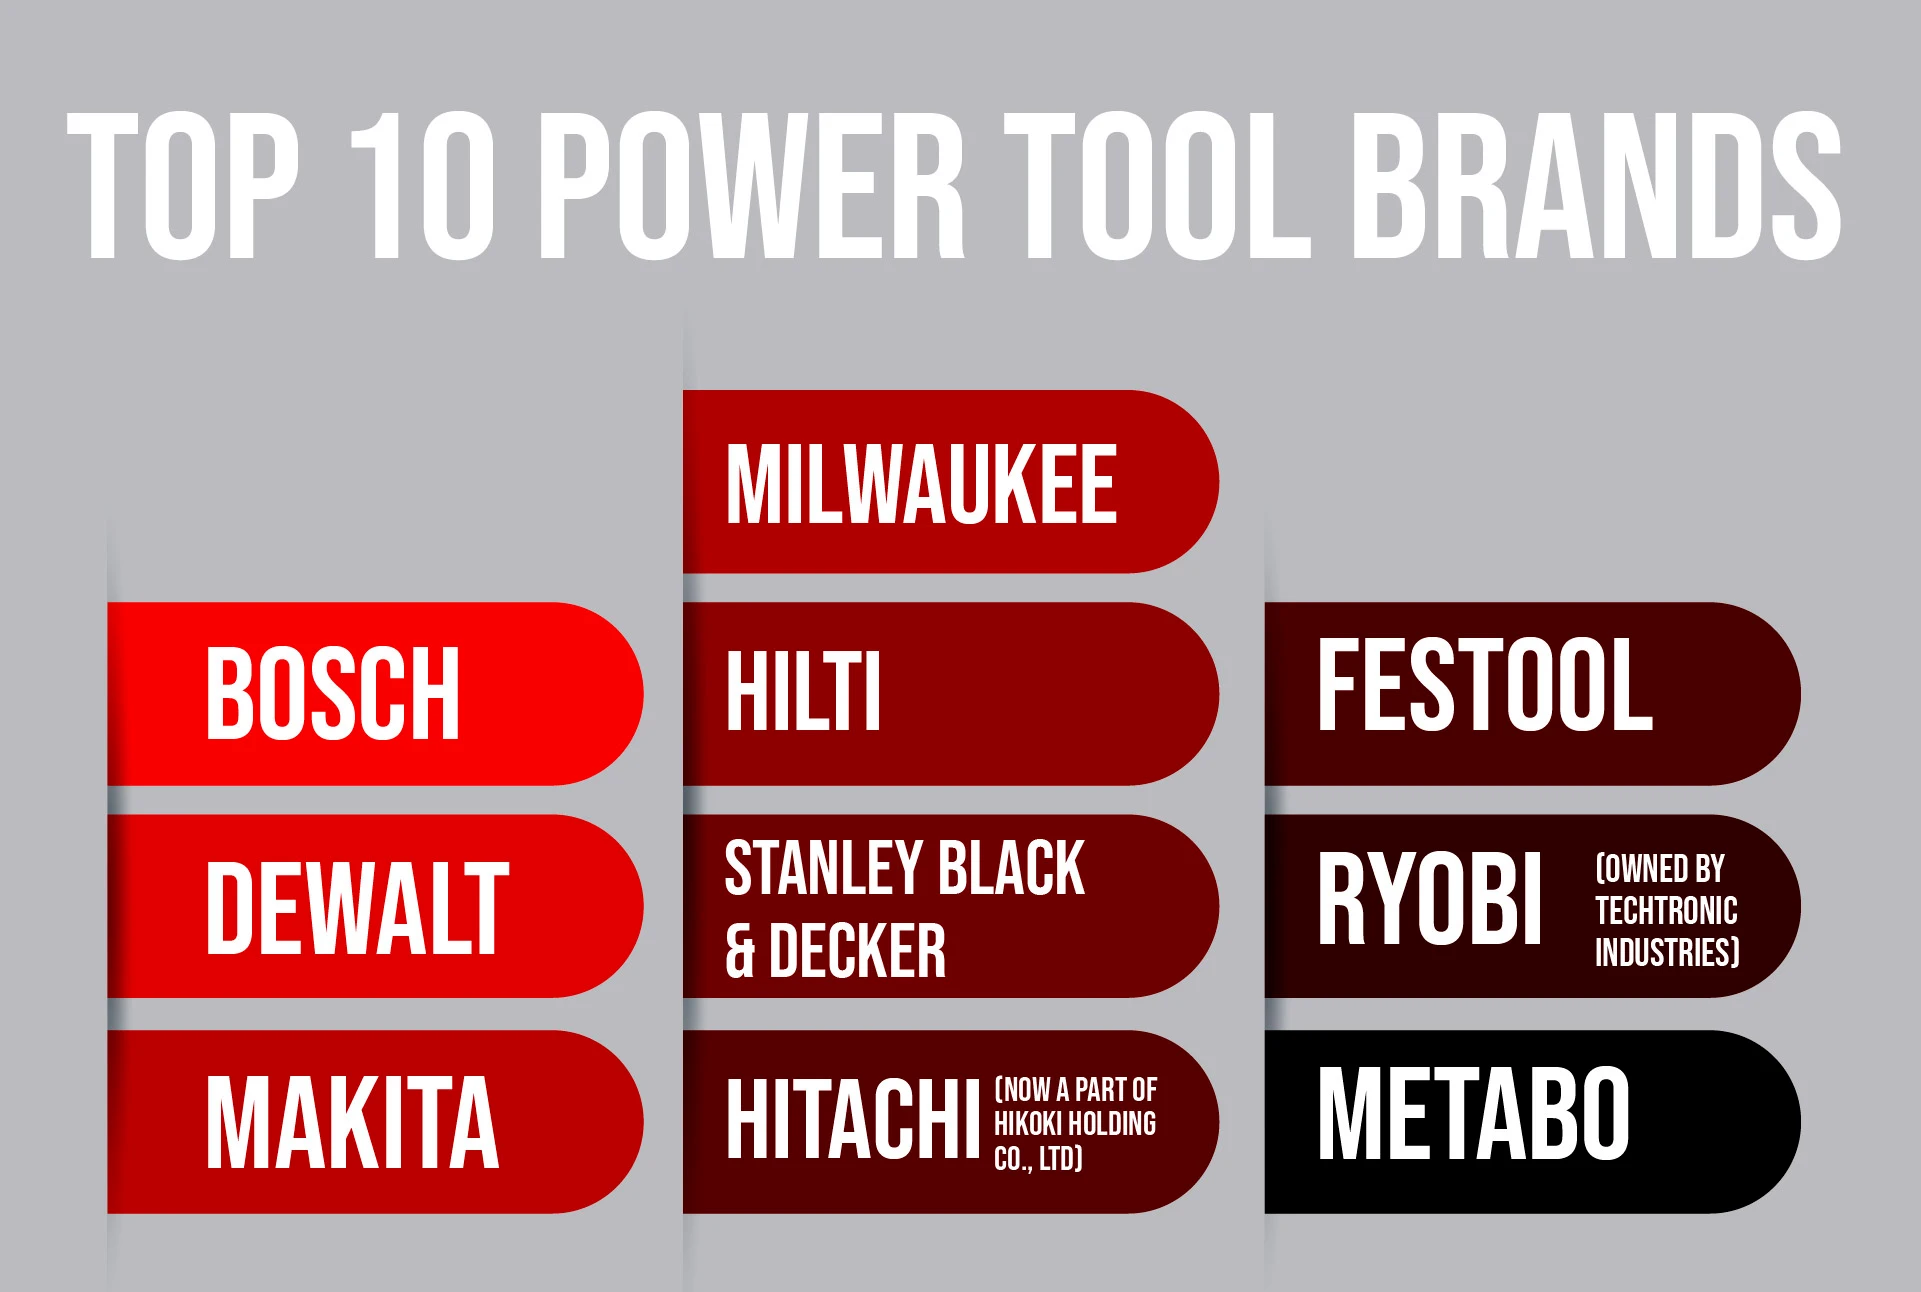 An Infographic about top power tool brands